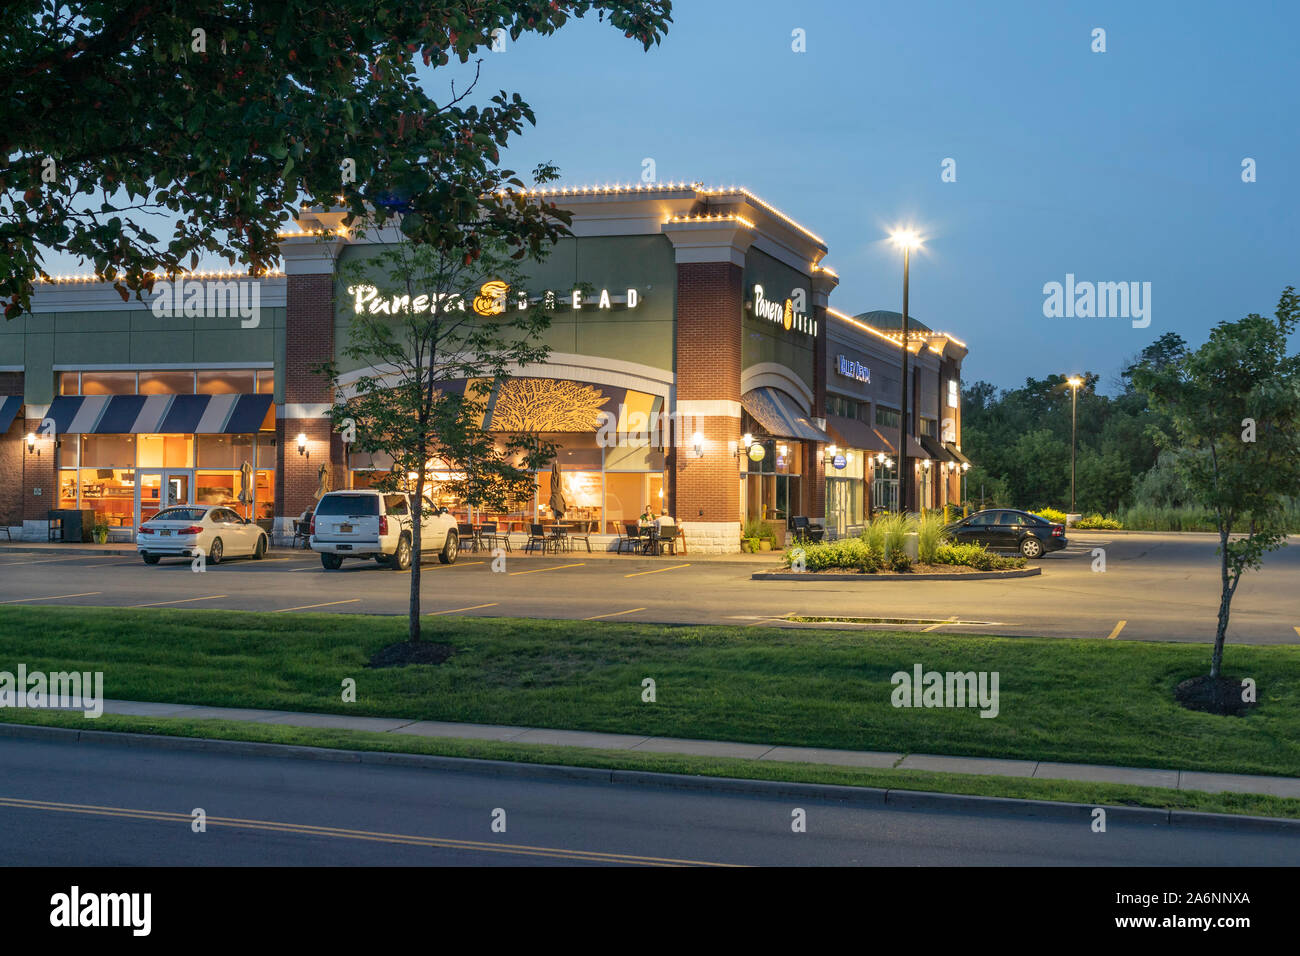 JACKSONVILLE, FL/USA - OCTOBER 25, 2016: Panera Bread Restaurant Exterior.  Panera Bread Is A Chain Of Bakery-casual Restaurants In The United States  And Canada. Stock Photo, Picture and Royalty Free Image. Image 64754190.